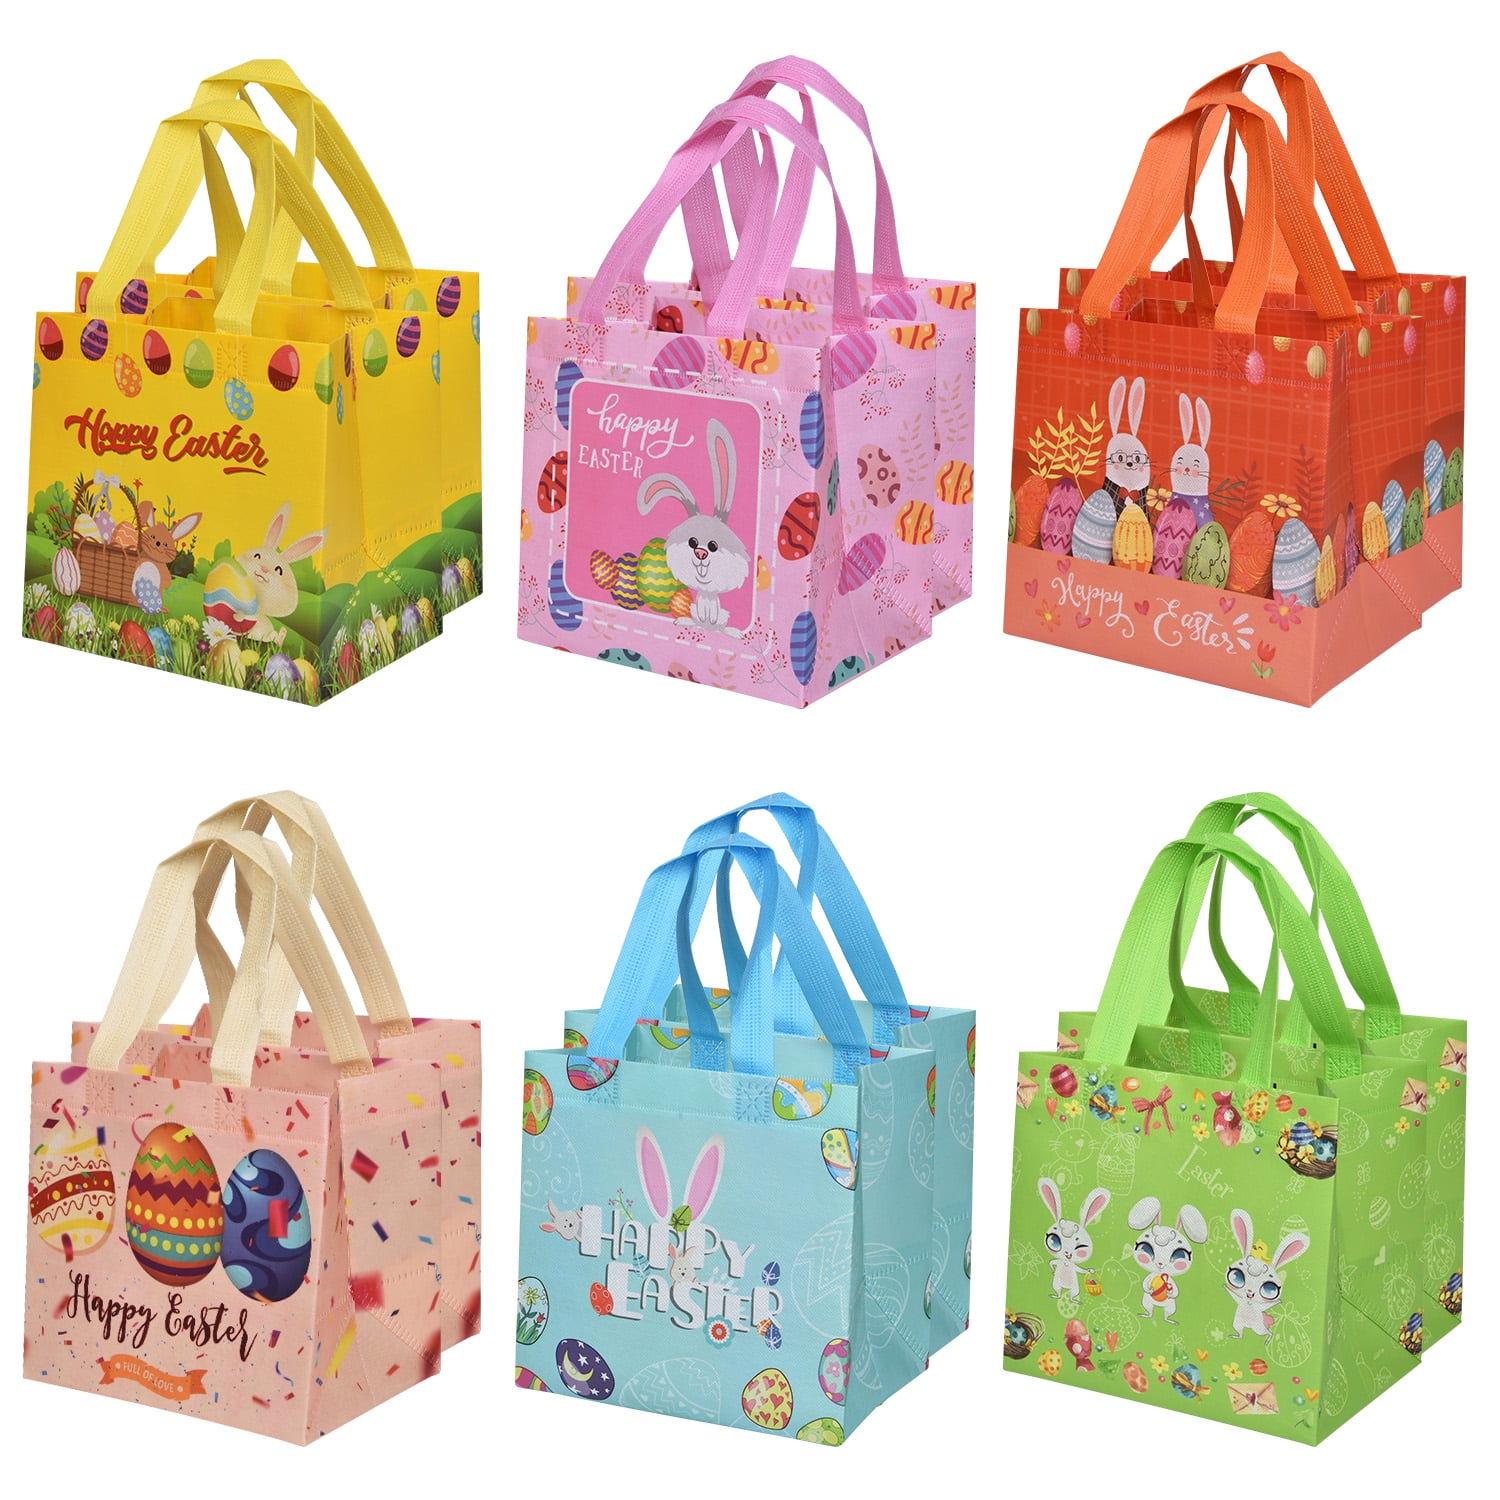 LONGRV 12 Pcs Easter Gift Bags, Woven Easter Goodie Bags Party Treat ...